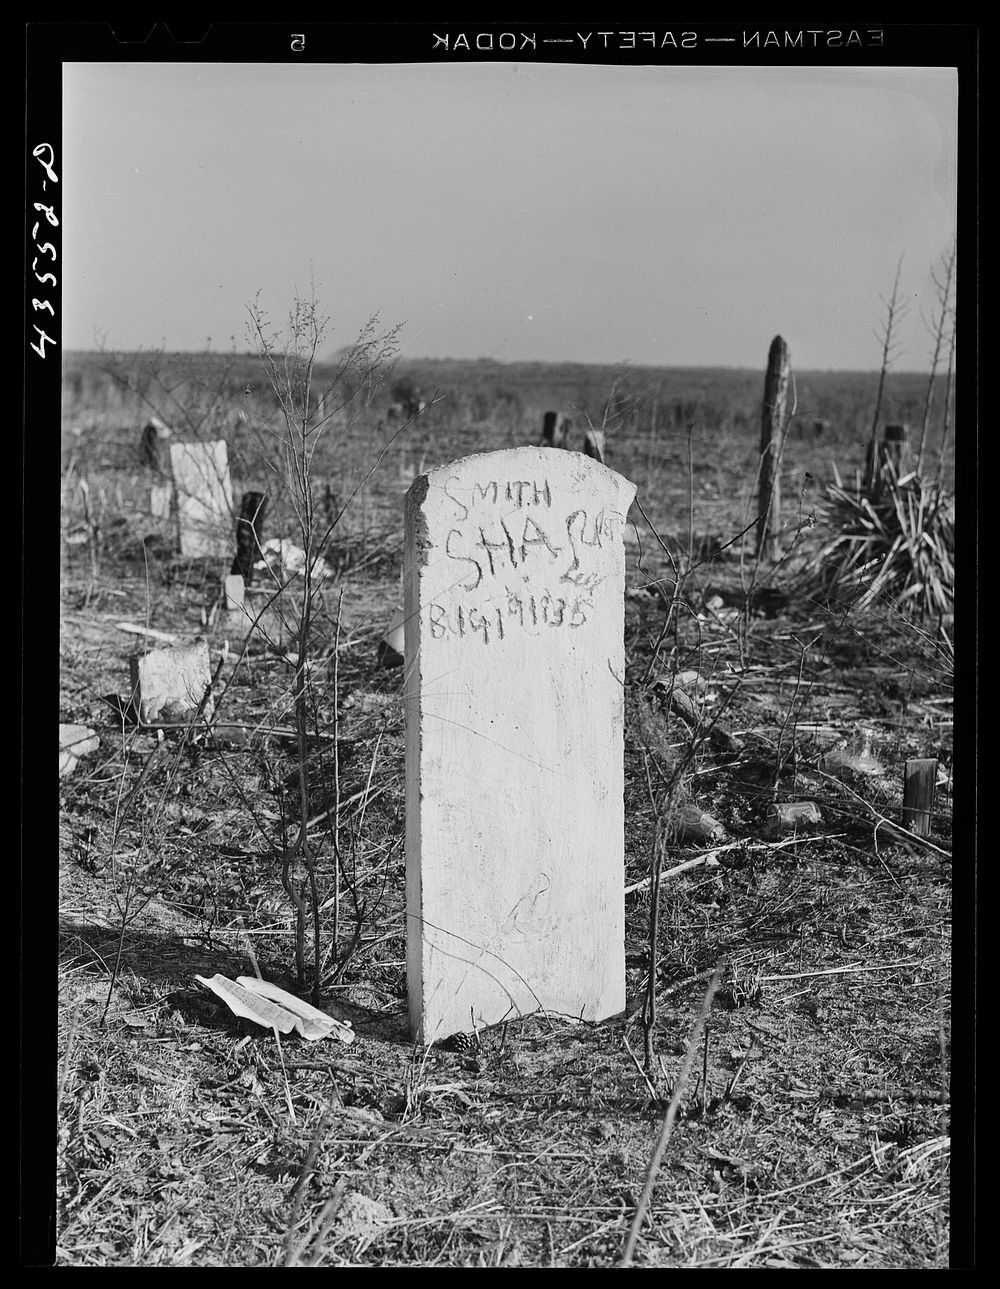  graveyard on abandoned land in the Santee-Cooper basin. South Carolina. Sourced from the Library of Congress.